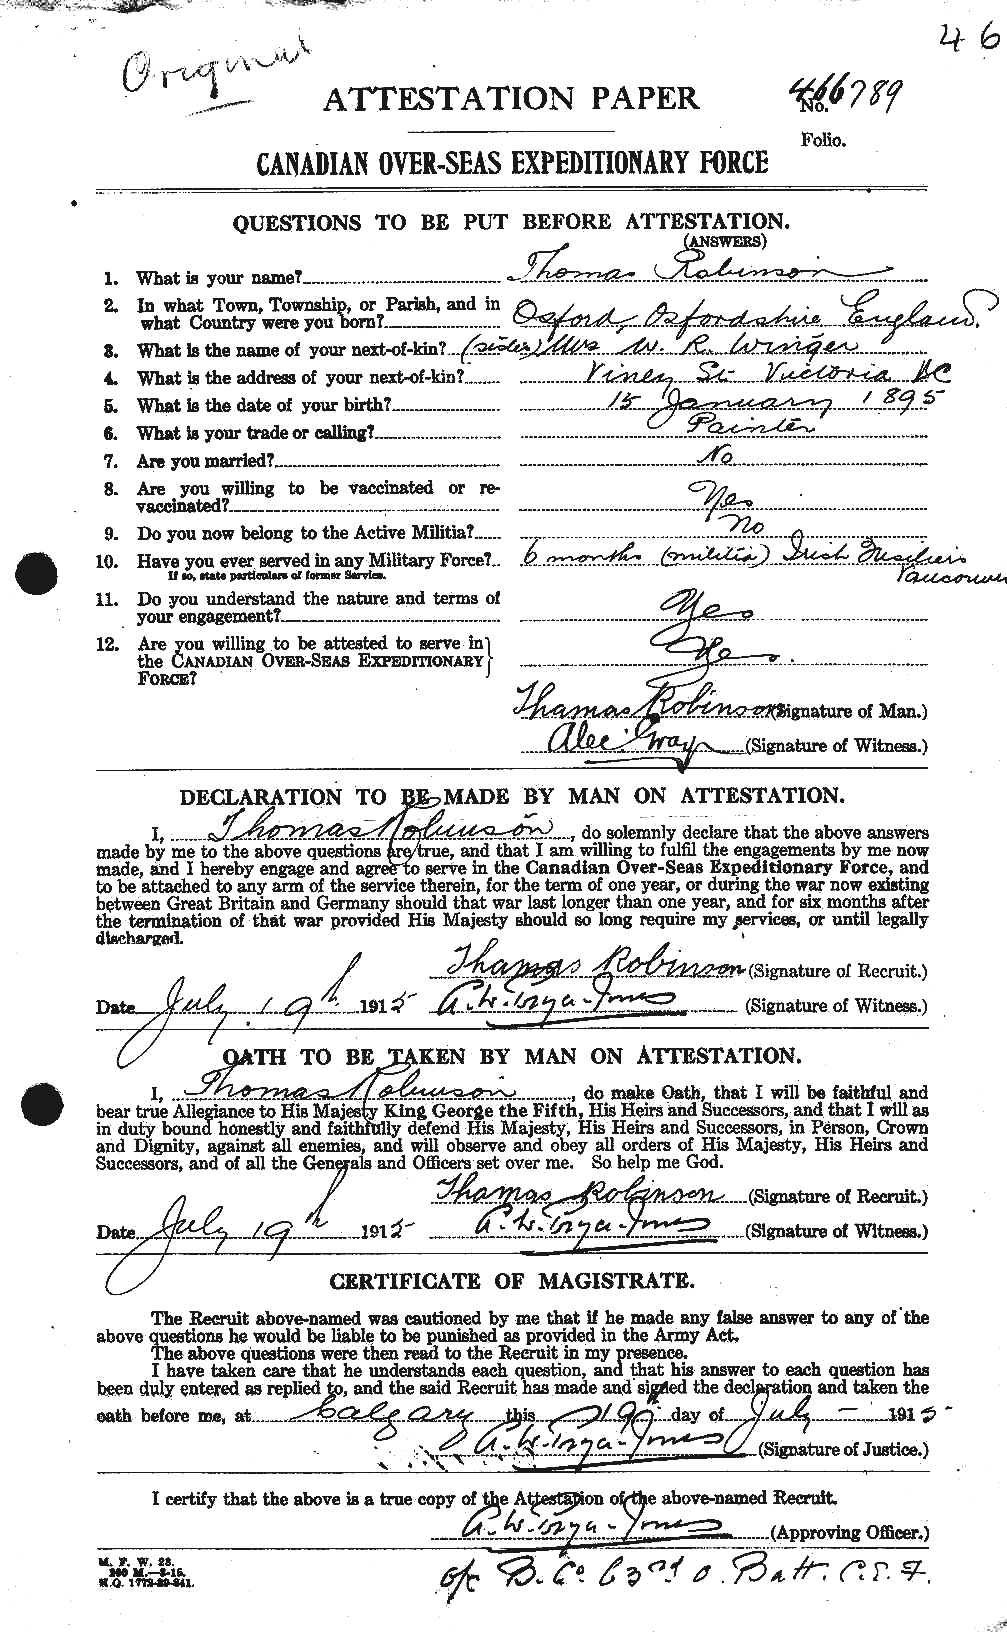 Personnel Records of the First World War - CEF 611904a